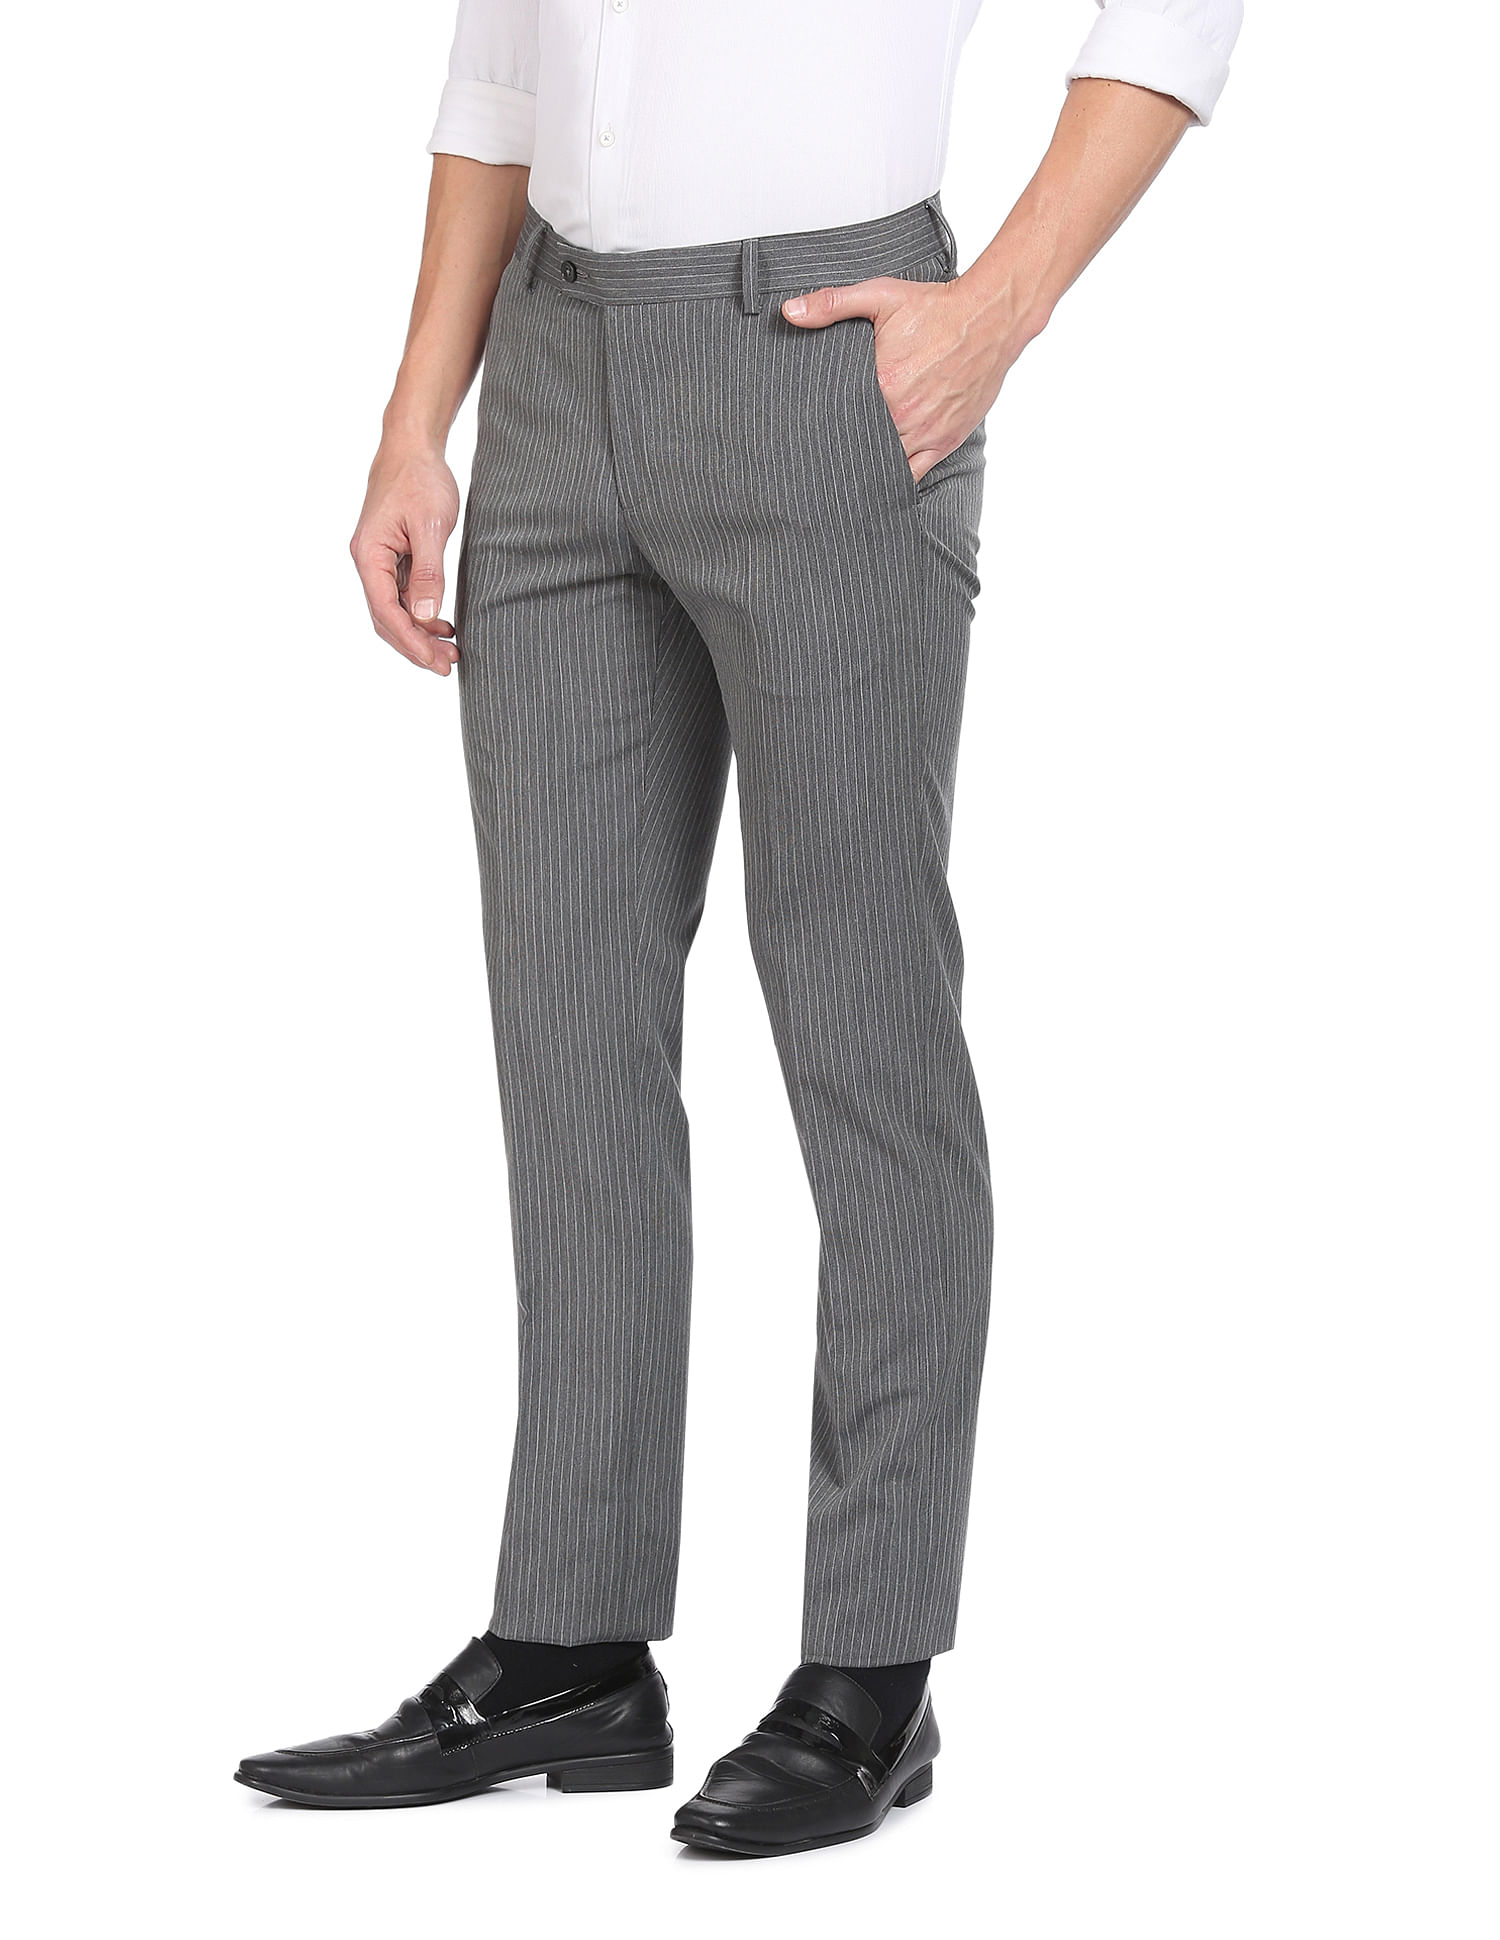 Pin Stripe Trousers  Black Striped Pants For Men PNG Image  Transparent  PNG Free Download on SeekPNG